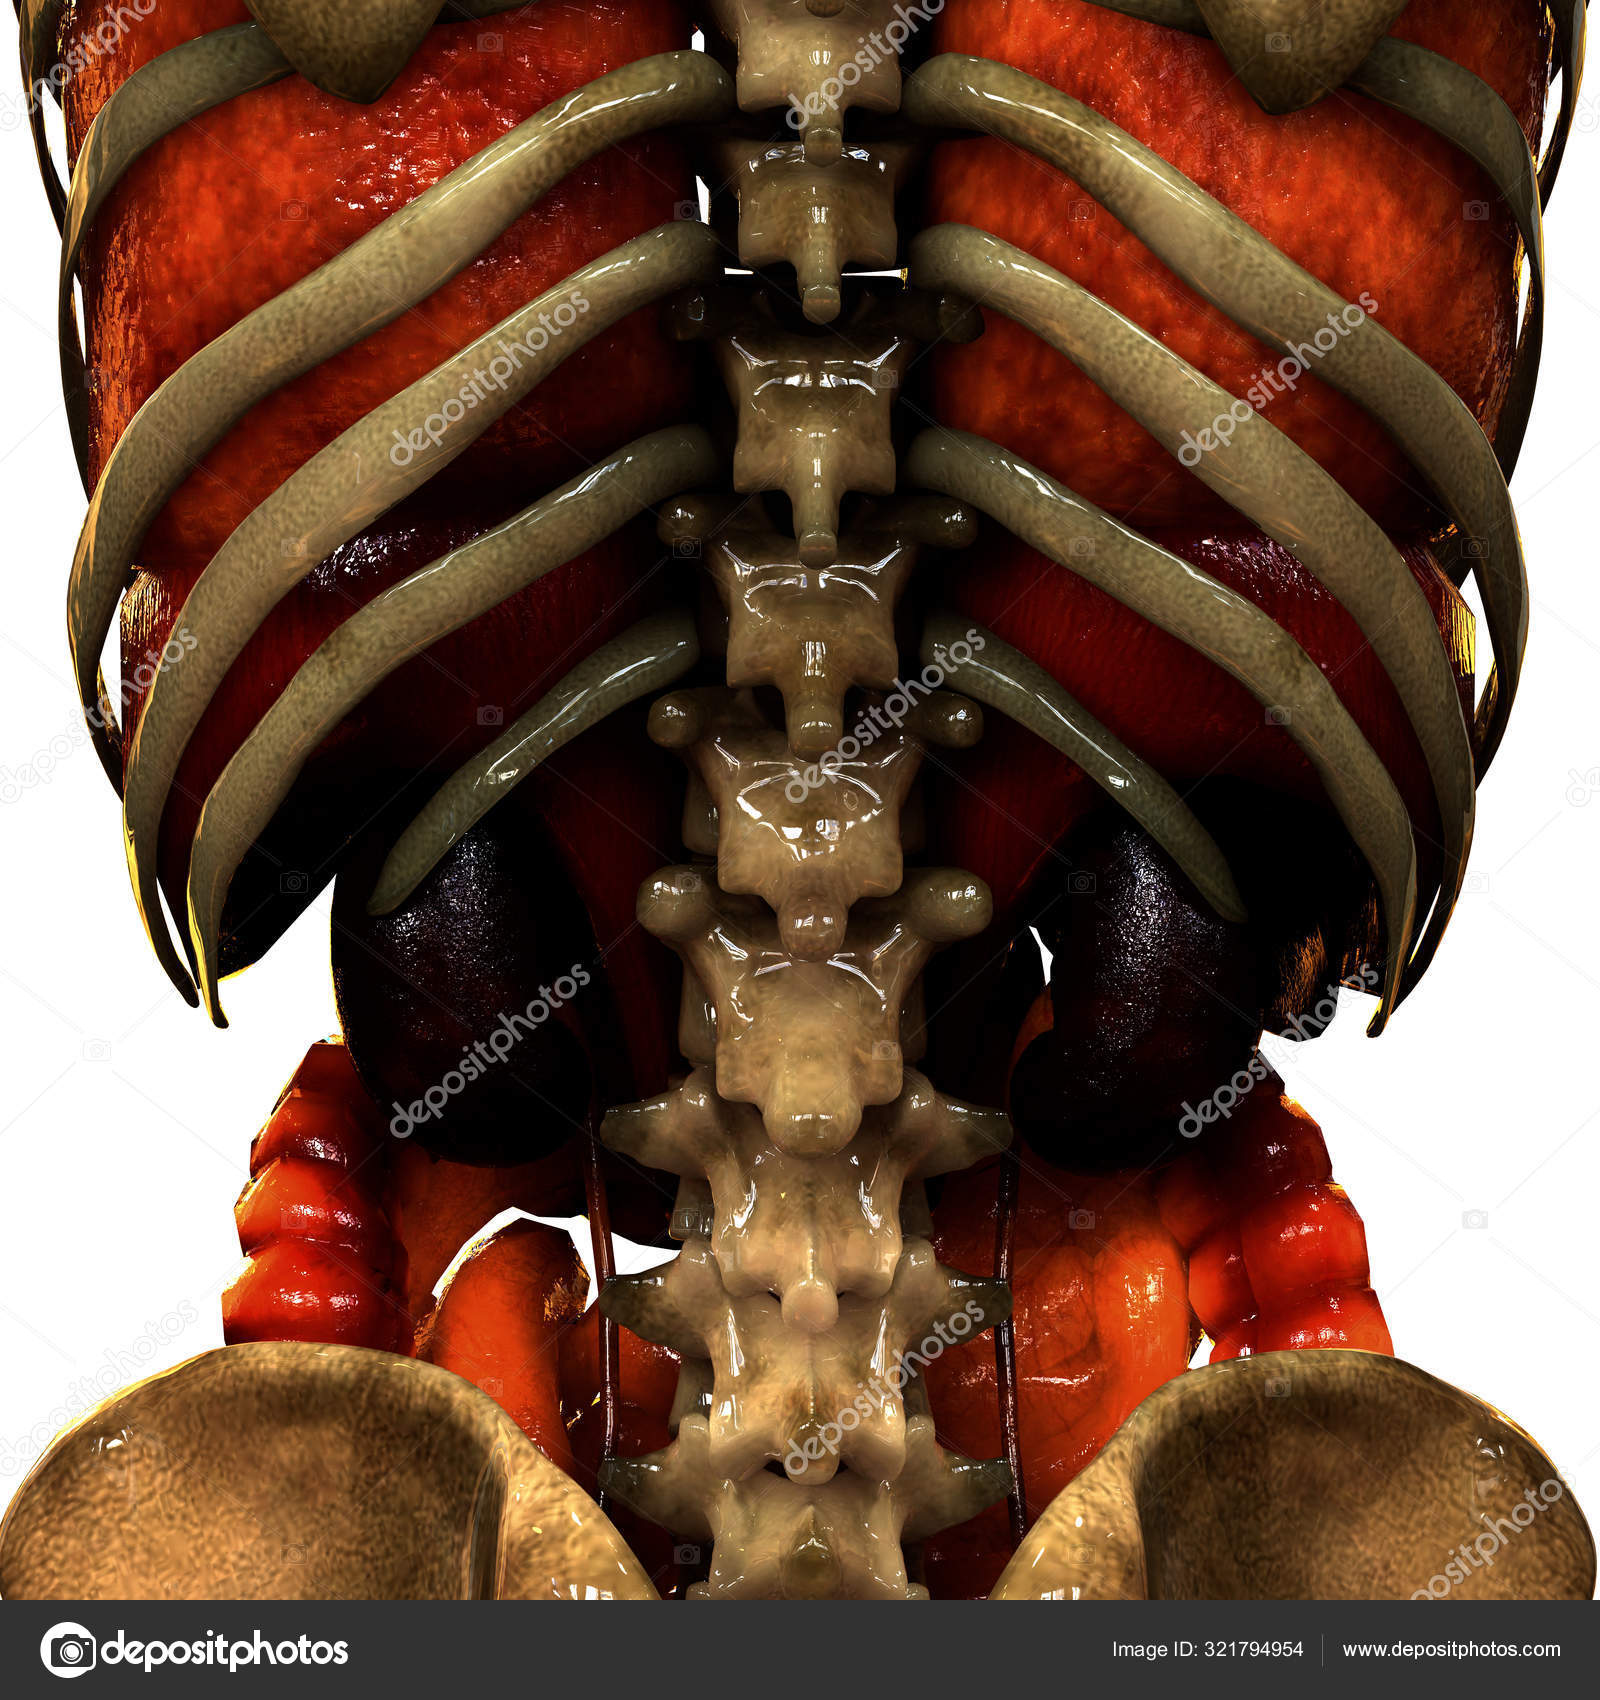 5 157 Rib Cage Stock Photos Images Download Rib Cage Pictures On Depositphotos